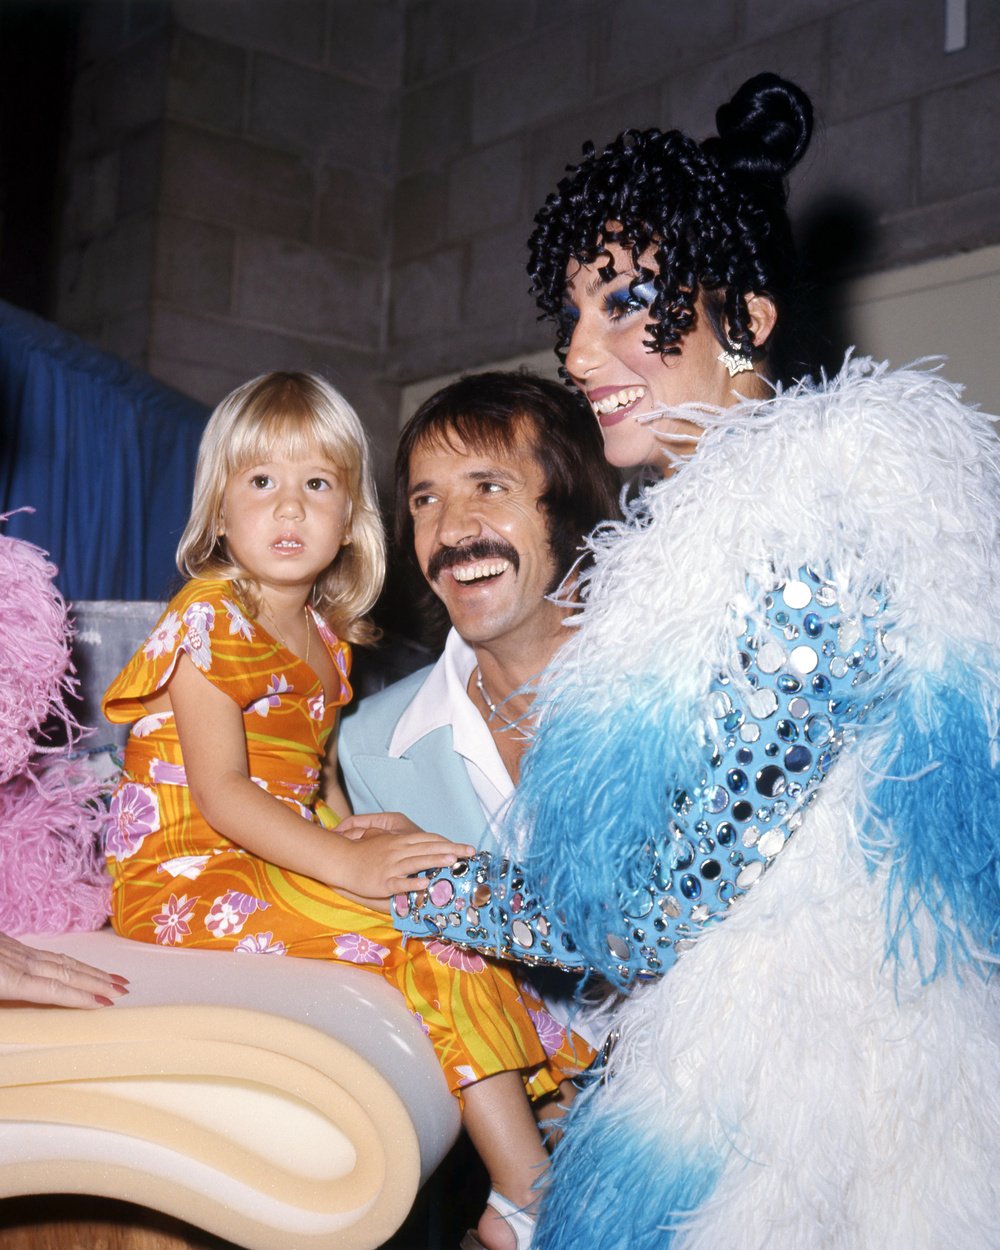 American pop singing duo Sonny & Cher with their daughter Chastity (later Chaz), circa 1973. Left to right: Chastity Bono, Sonny Bono (1935 - 1998) and Cher. (Photo by Silver Screen Collection/Getty Images)